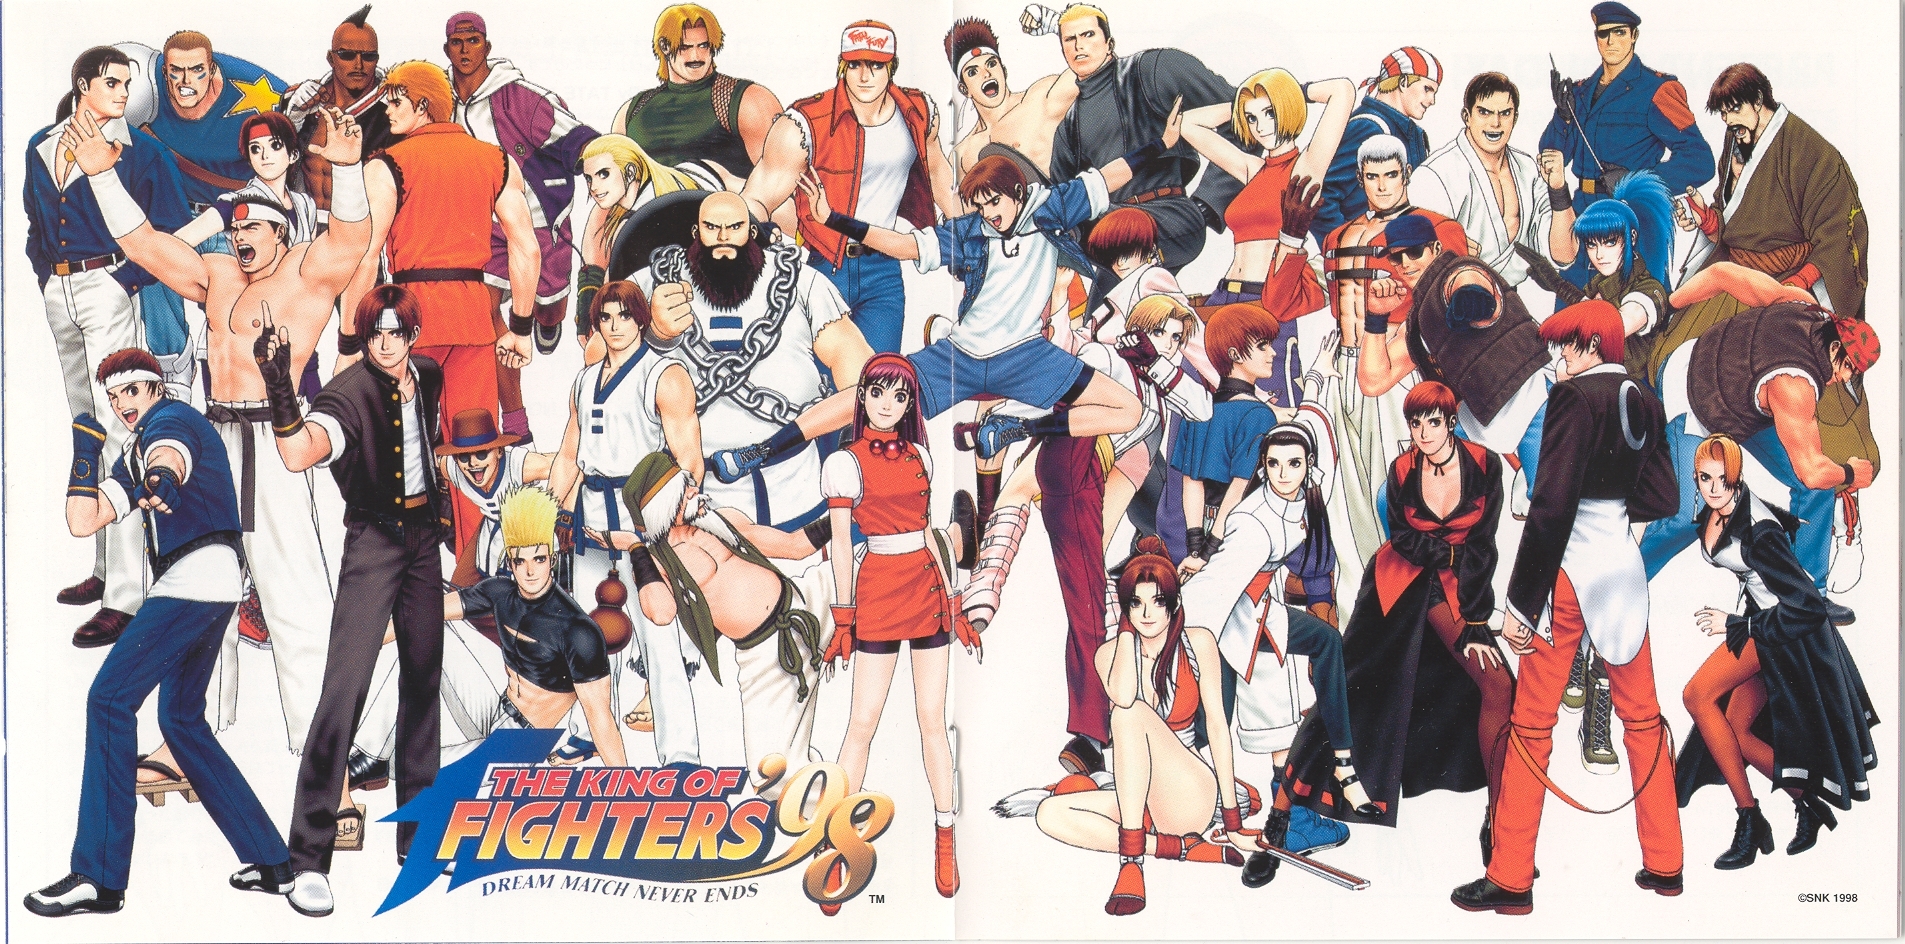 THE KING OF FIGHTERS '98 (1998) MP3 - Download THE KING OF FIGHTERS '98 ( 1998) Soundtracks for FREE!